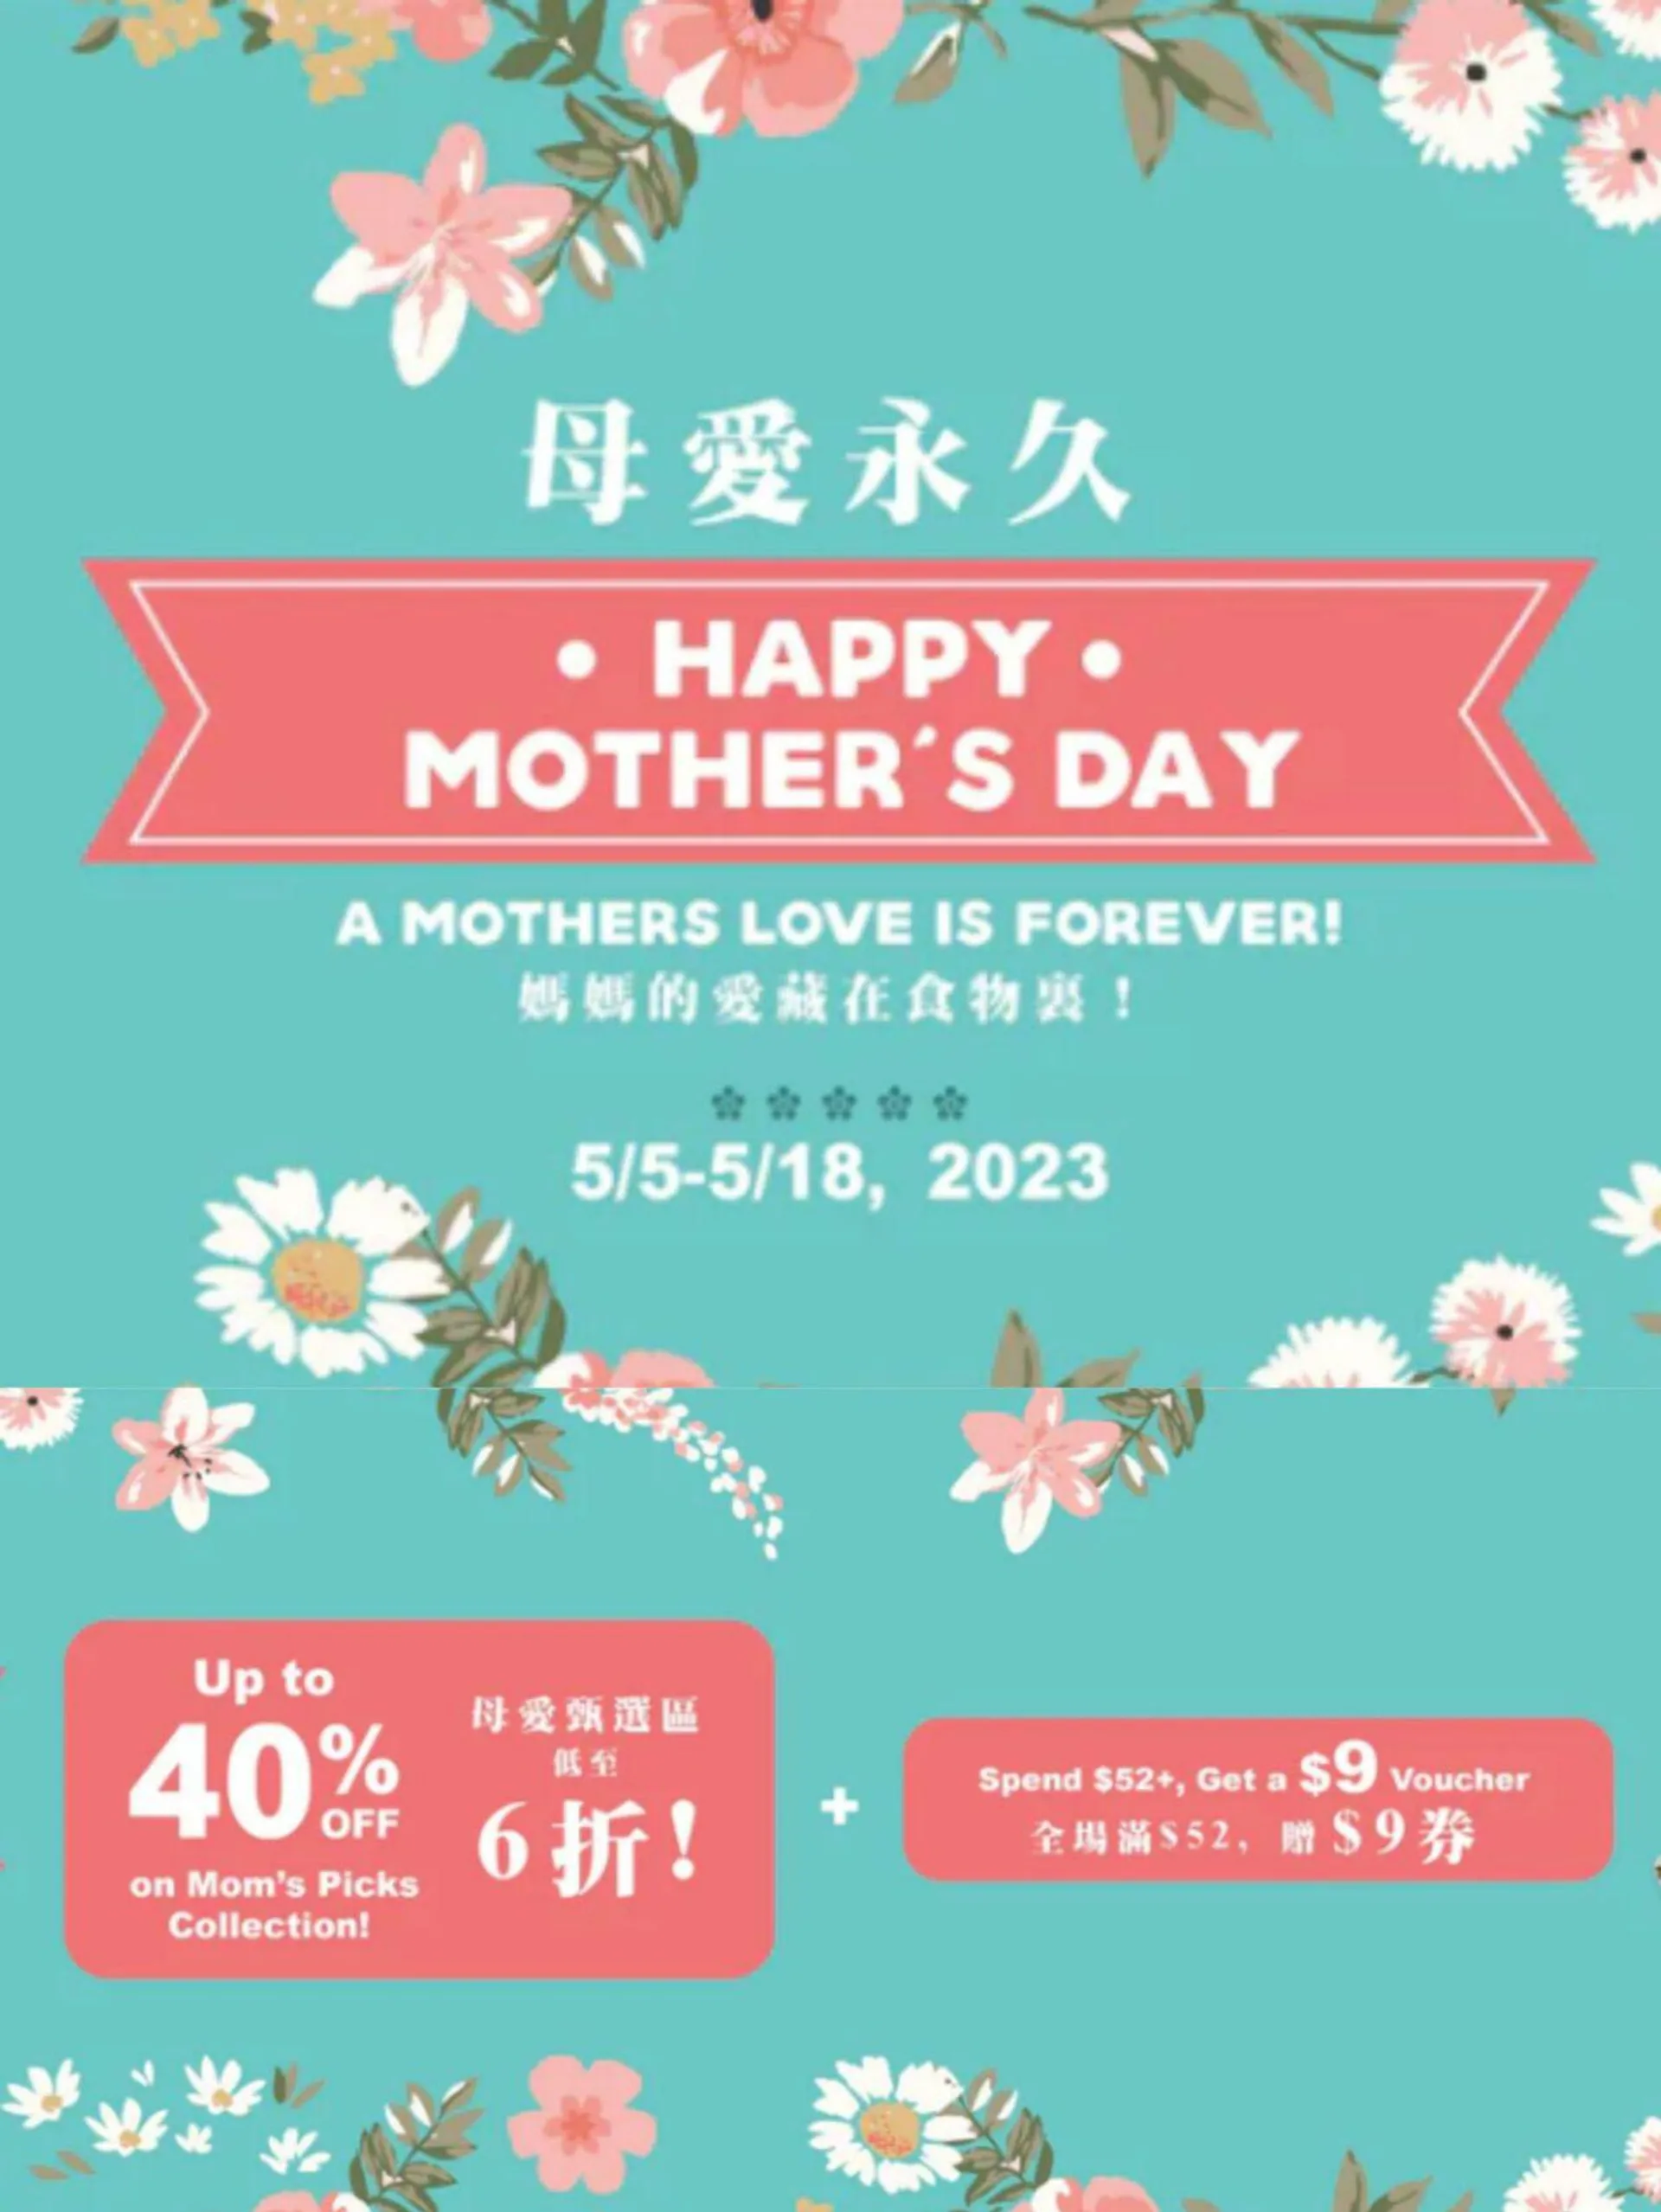 99 Ranch Market - 99 Fresh - Mothers Day 2023 - 1